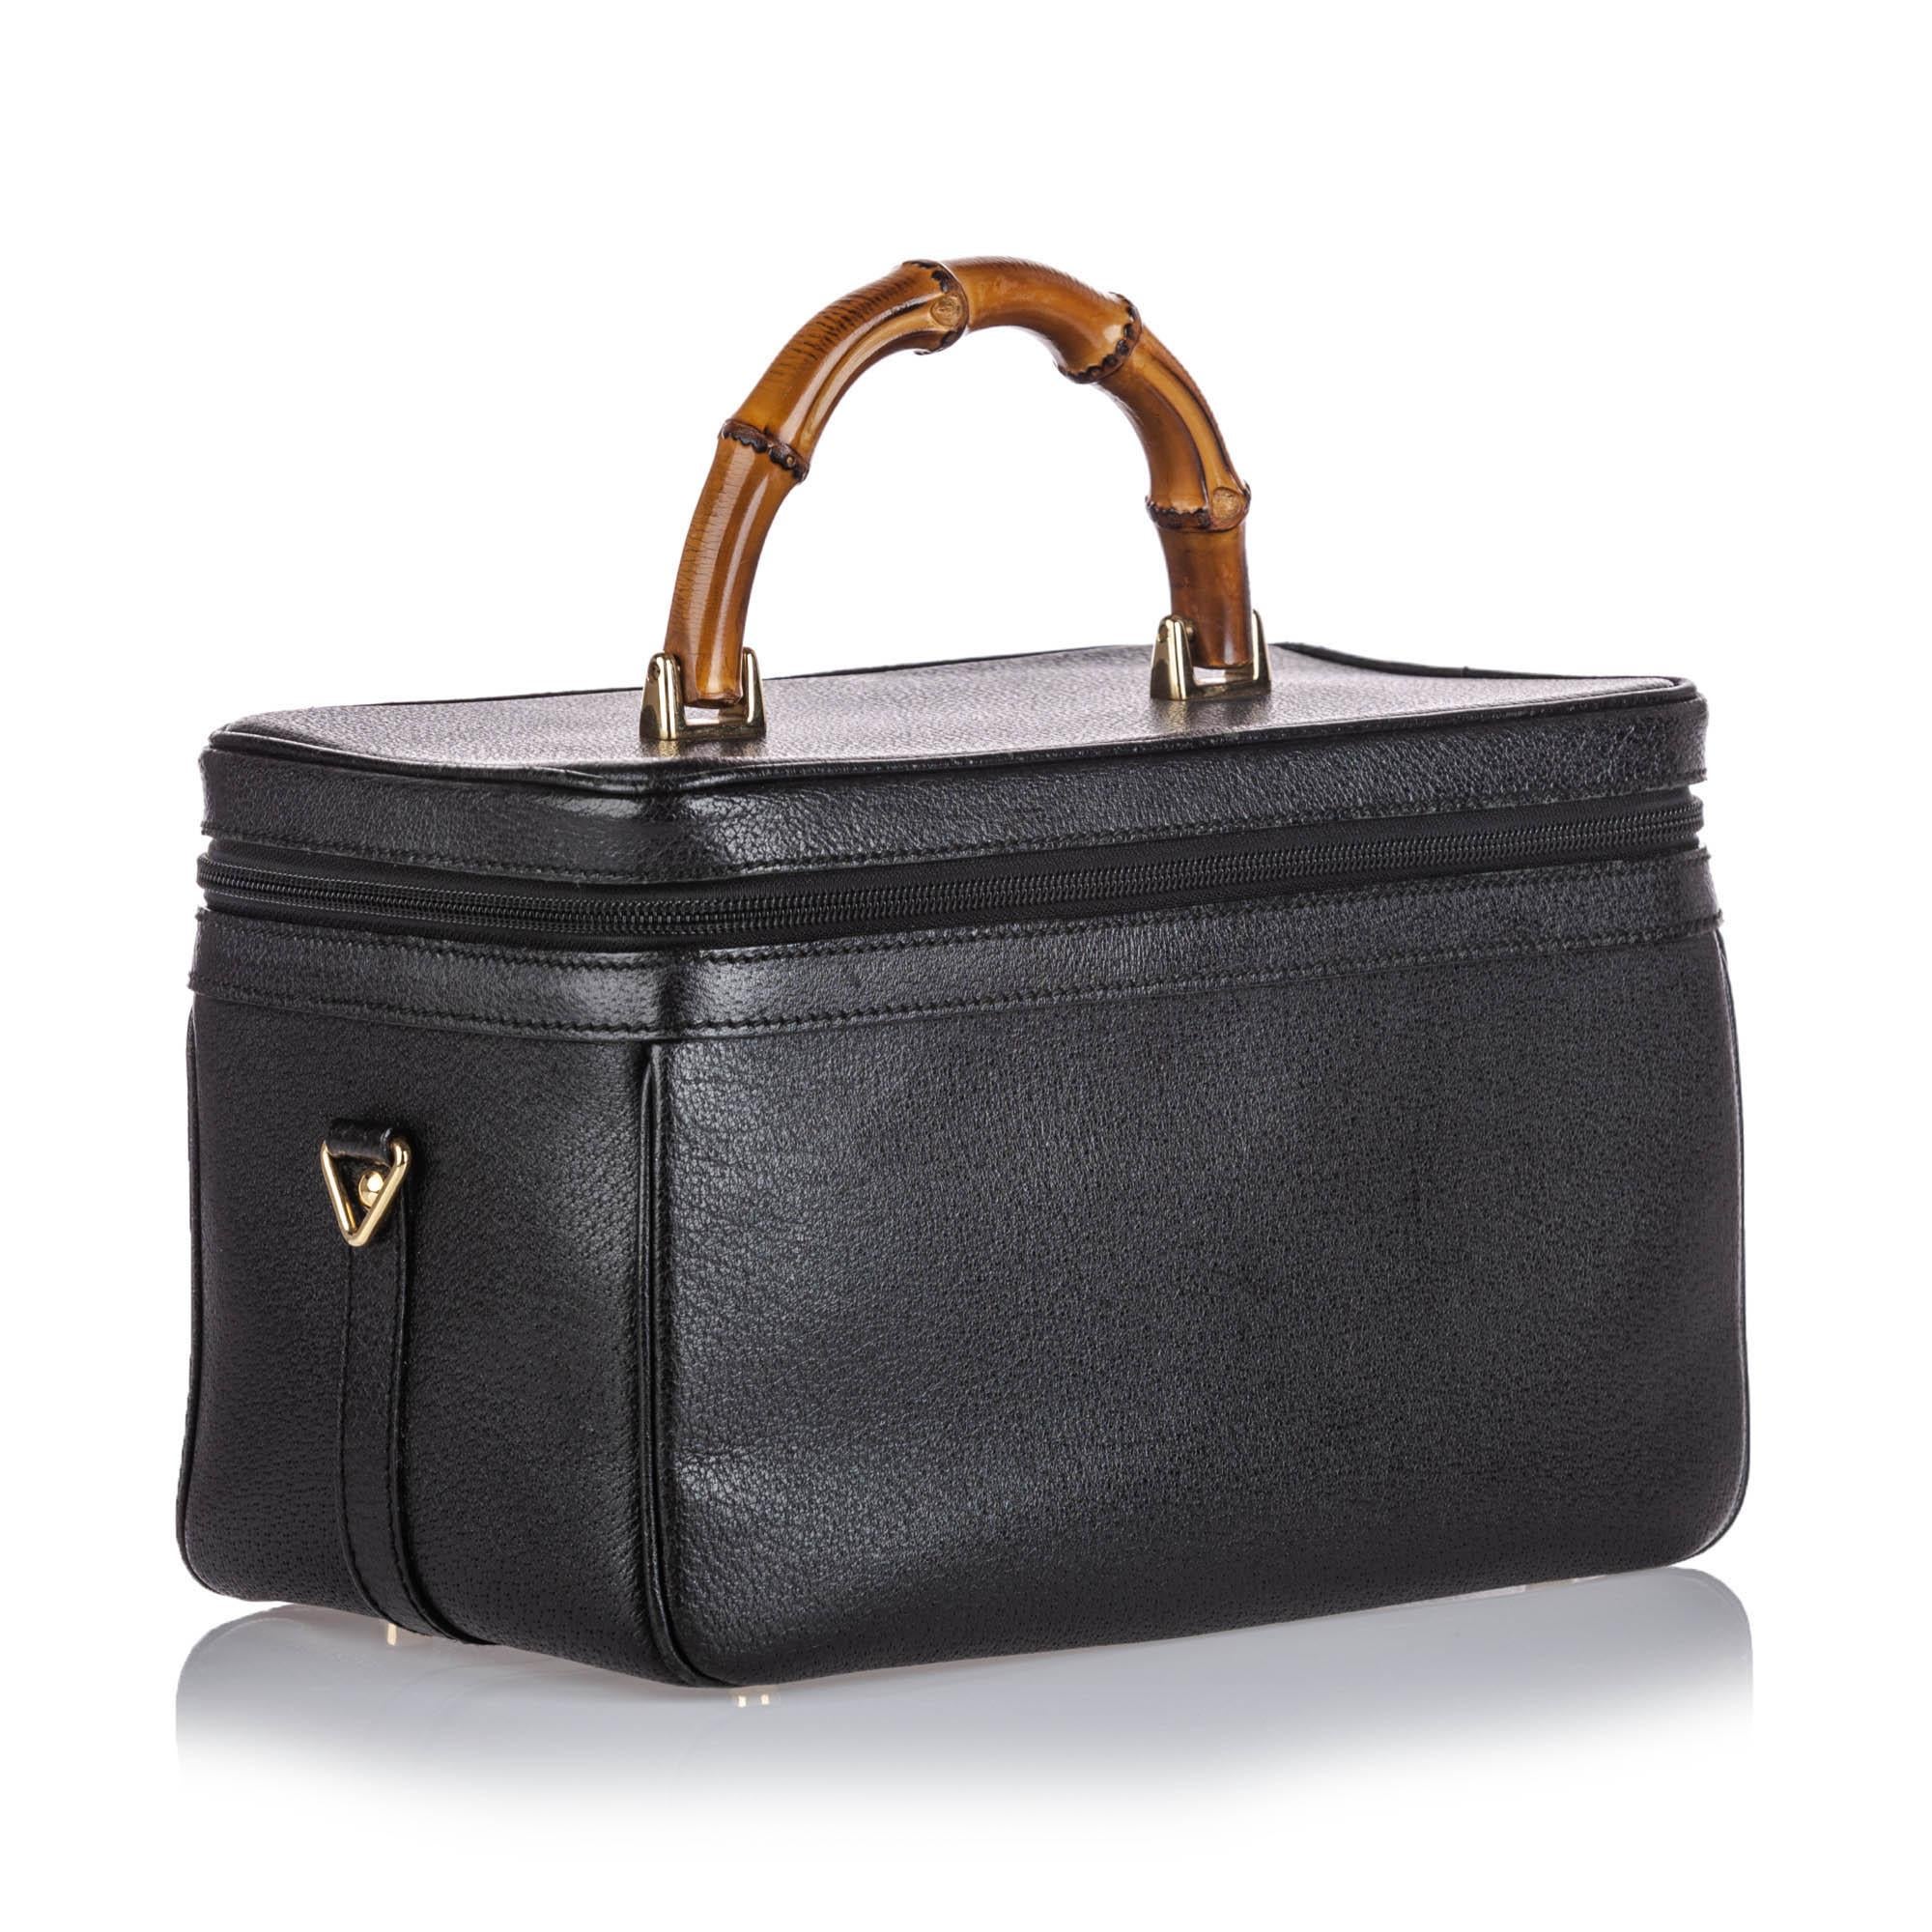 This vanity bag features a leather body, a bamboo top handle, a flat leather strap, a zip around closure, an interior mirror and a zip pocket. It carries as AB condition rating.

Inclusions: 
This item does not come with